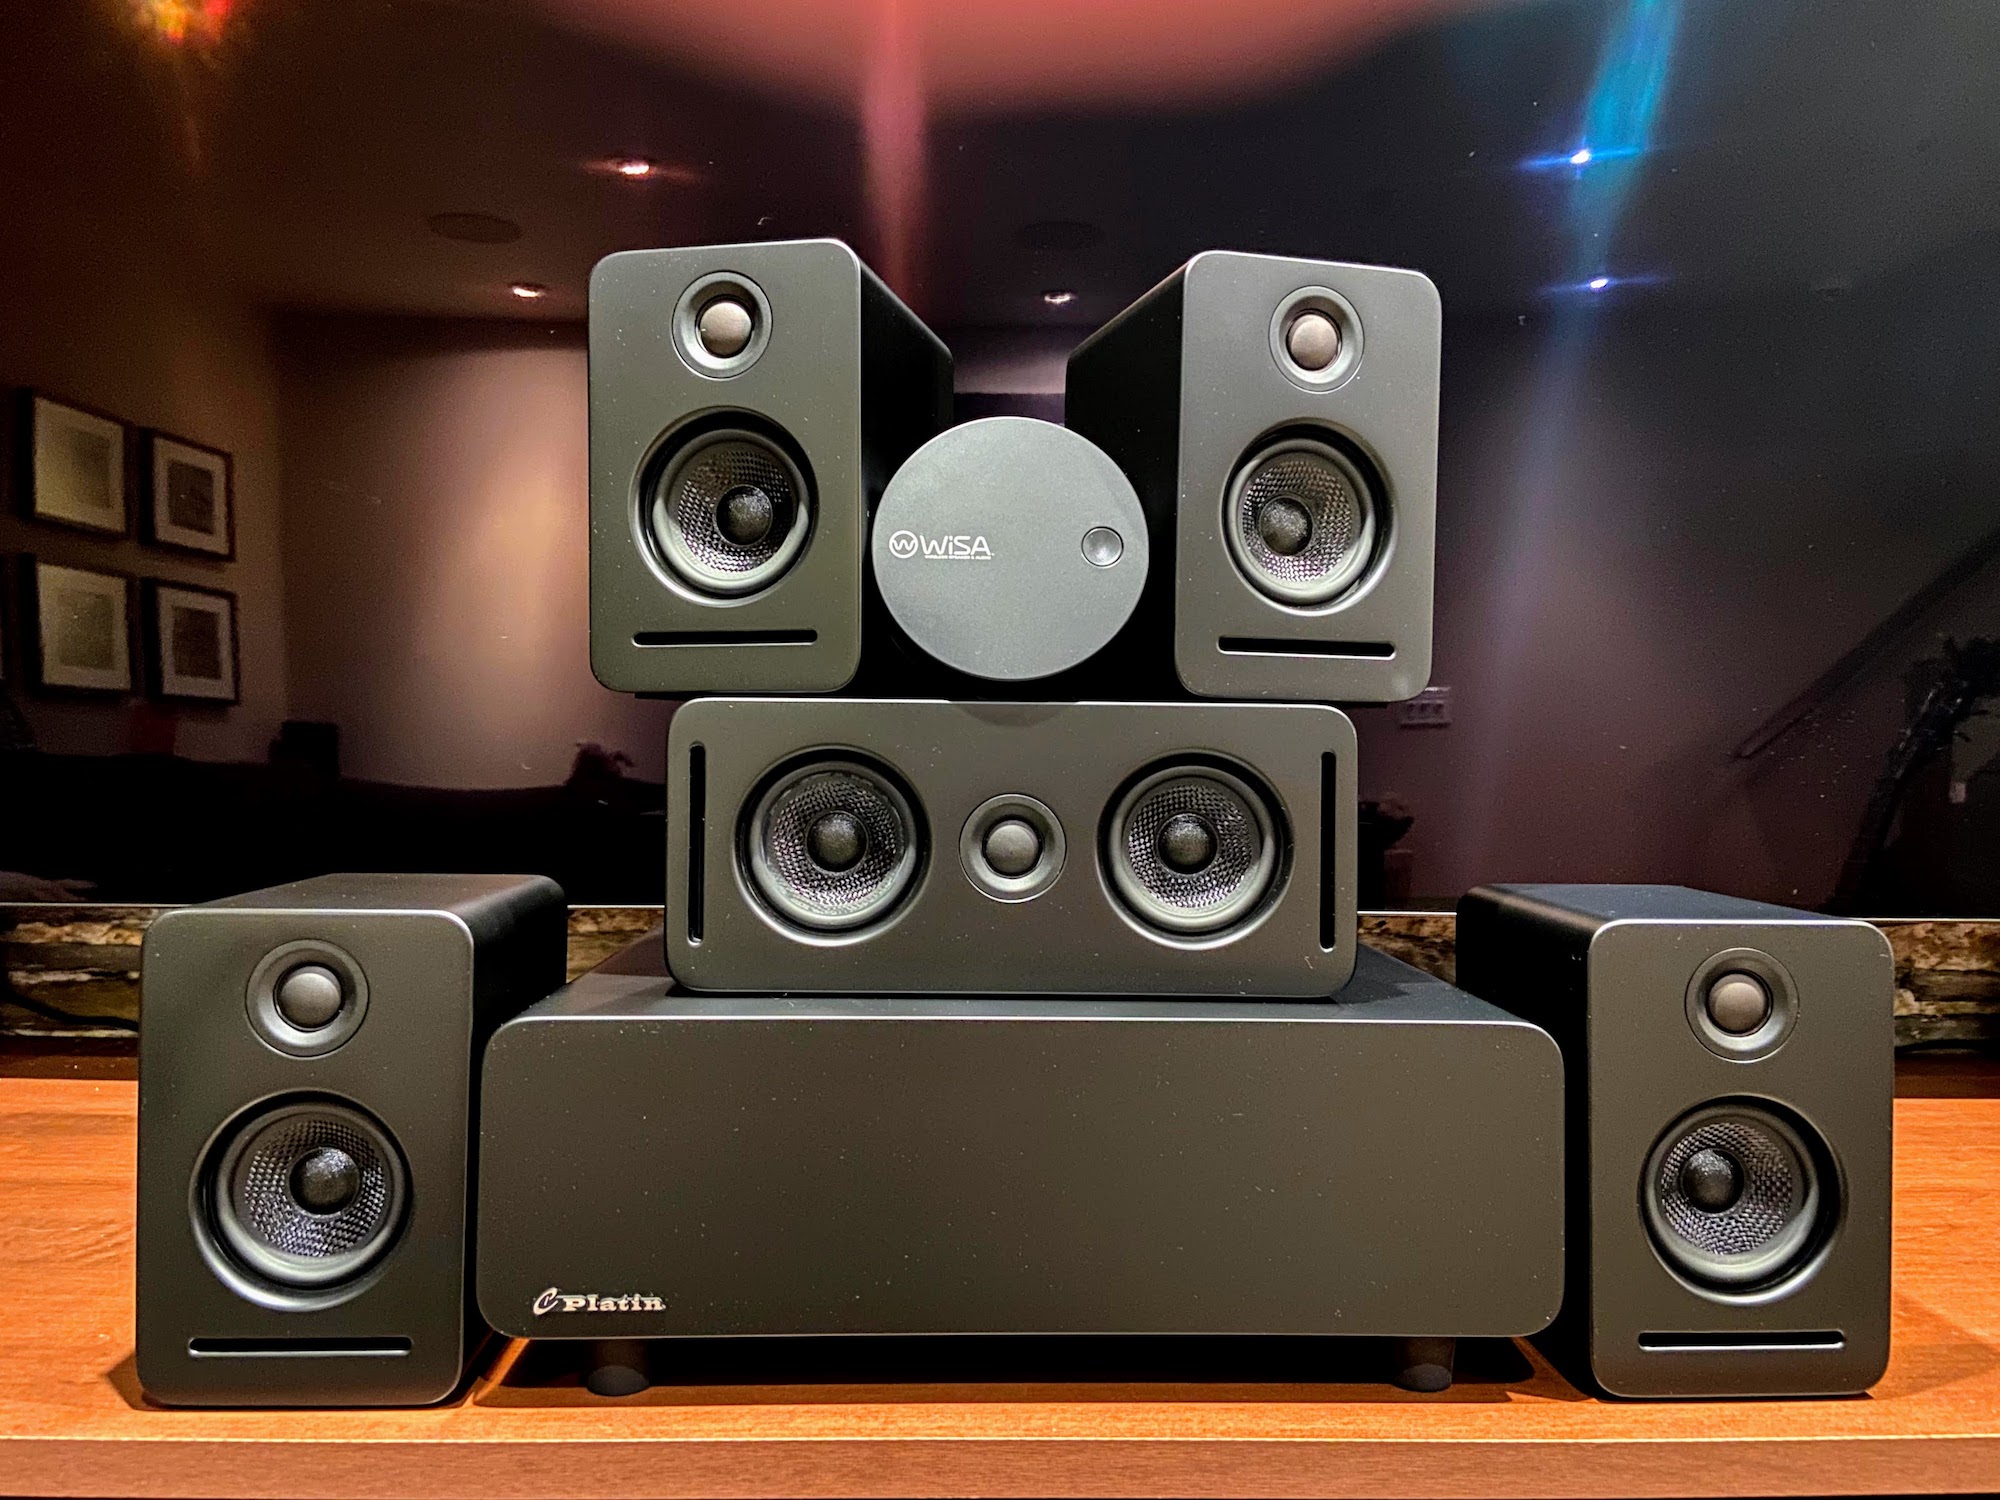 Hands-On With A WiSA Wireless 5.1 Home Theater System